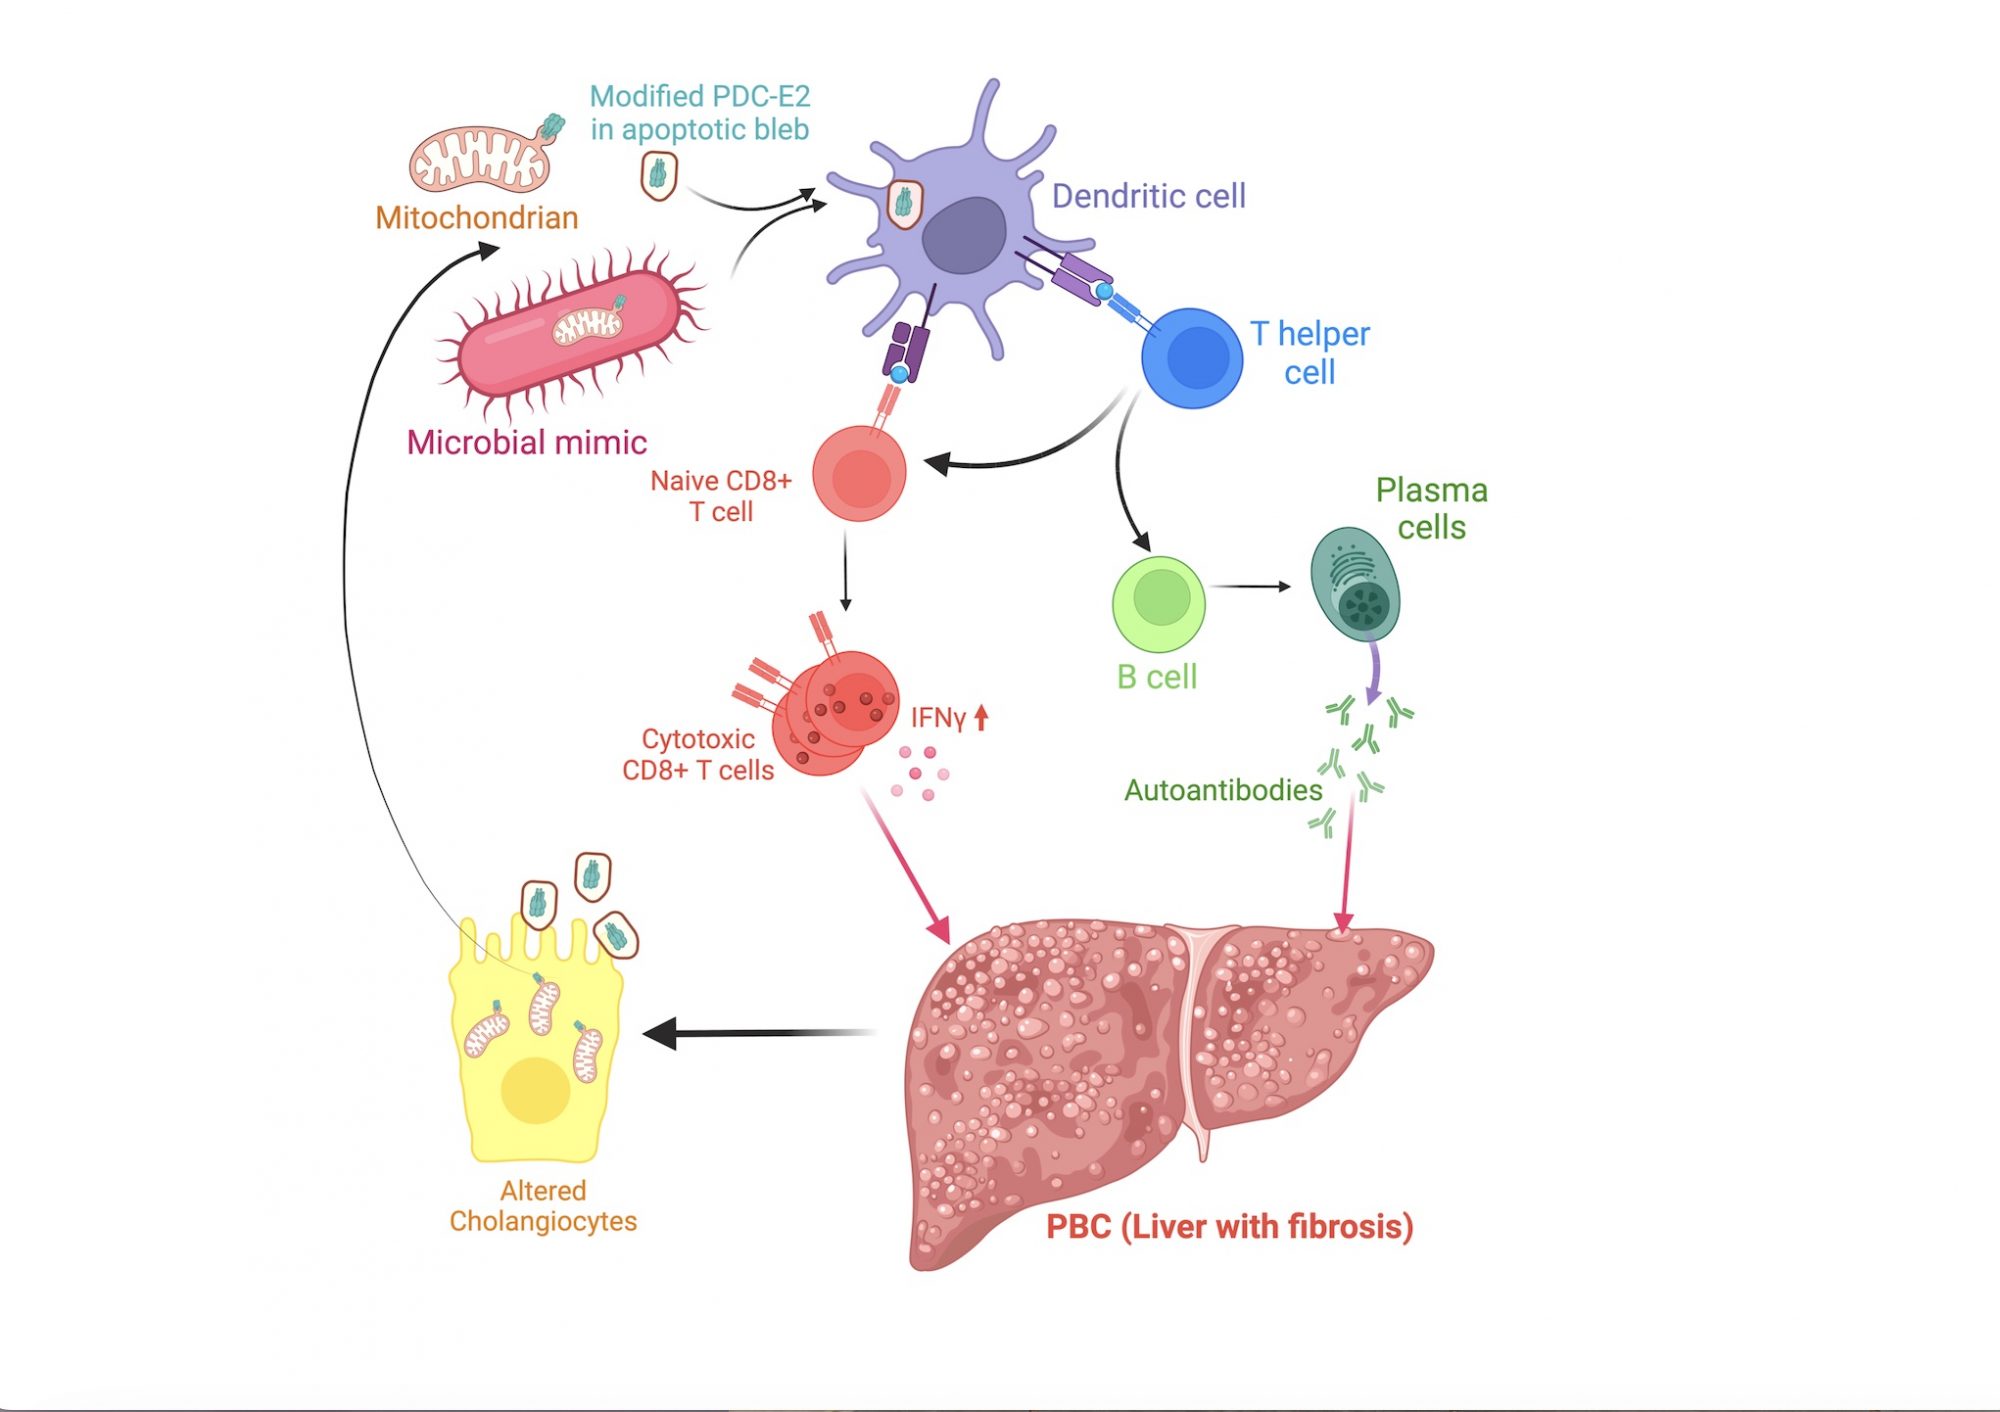 Figure 1. Immune dysregulation in PBC. Exposure to an environmental mimic of a modified PDC-E2 autoantigen leads to a multilineage immune response targeted at biliary epithelial cells. Created with BioRender.com